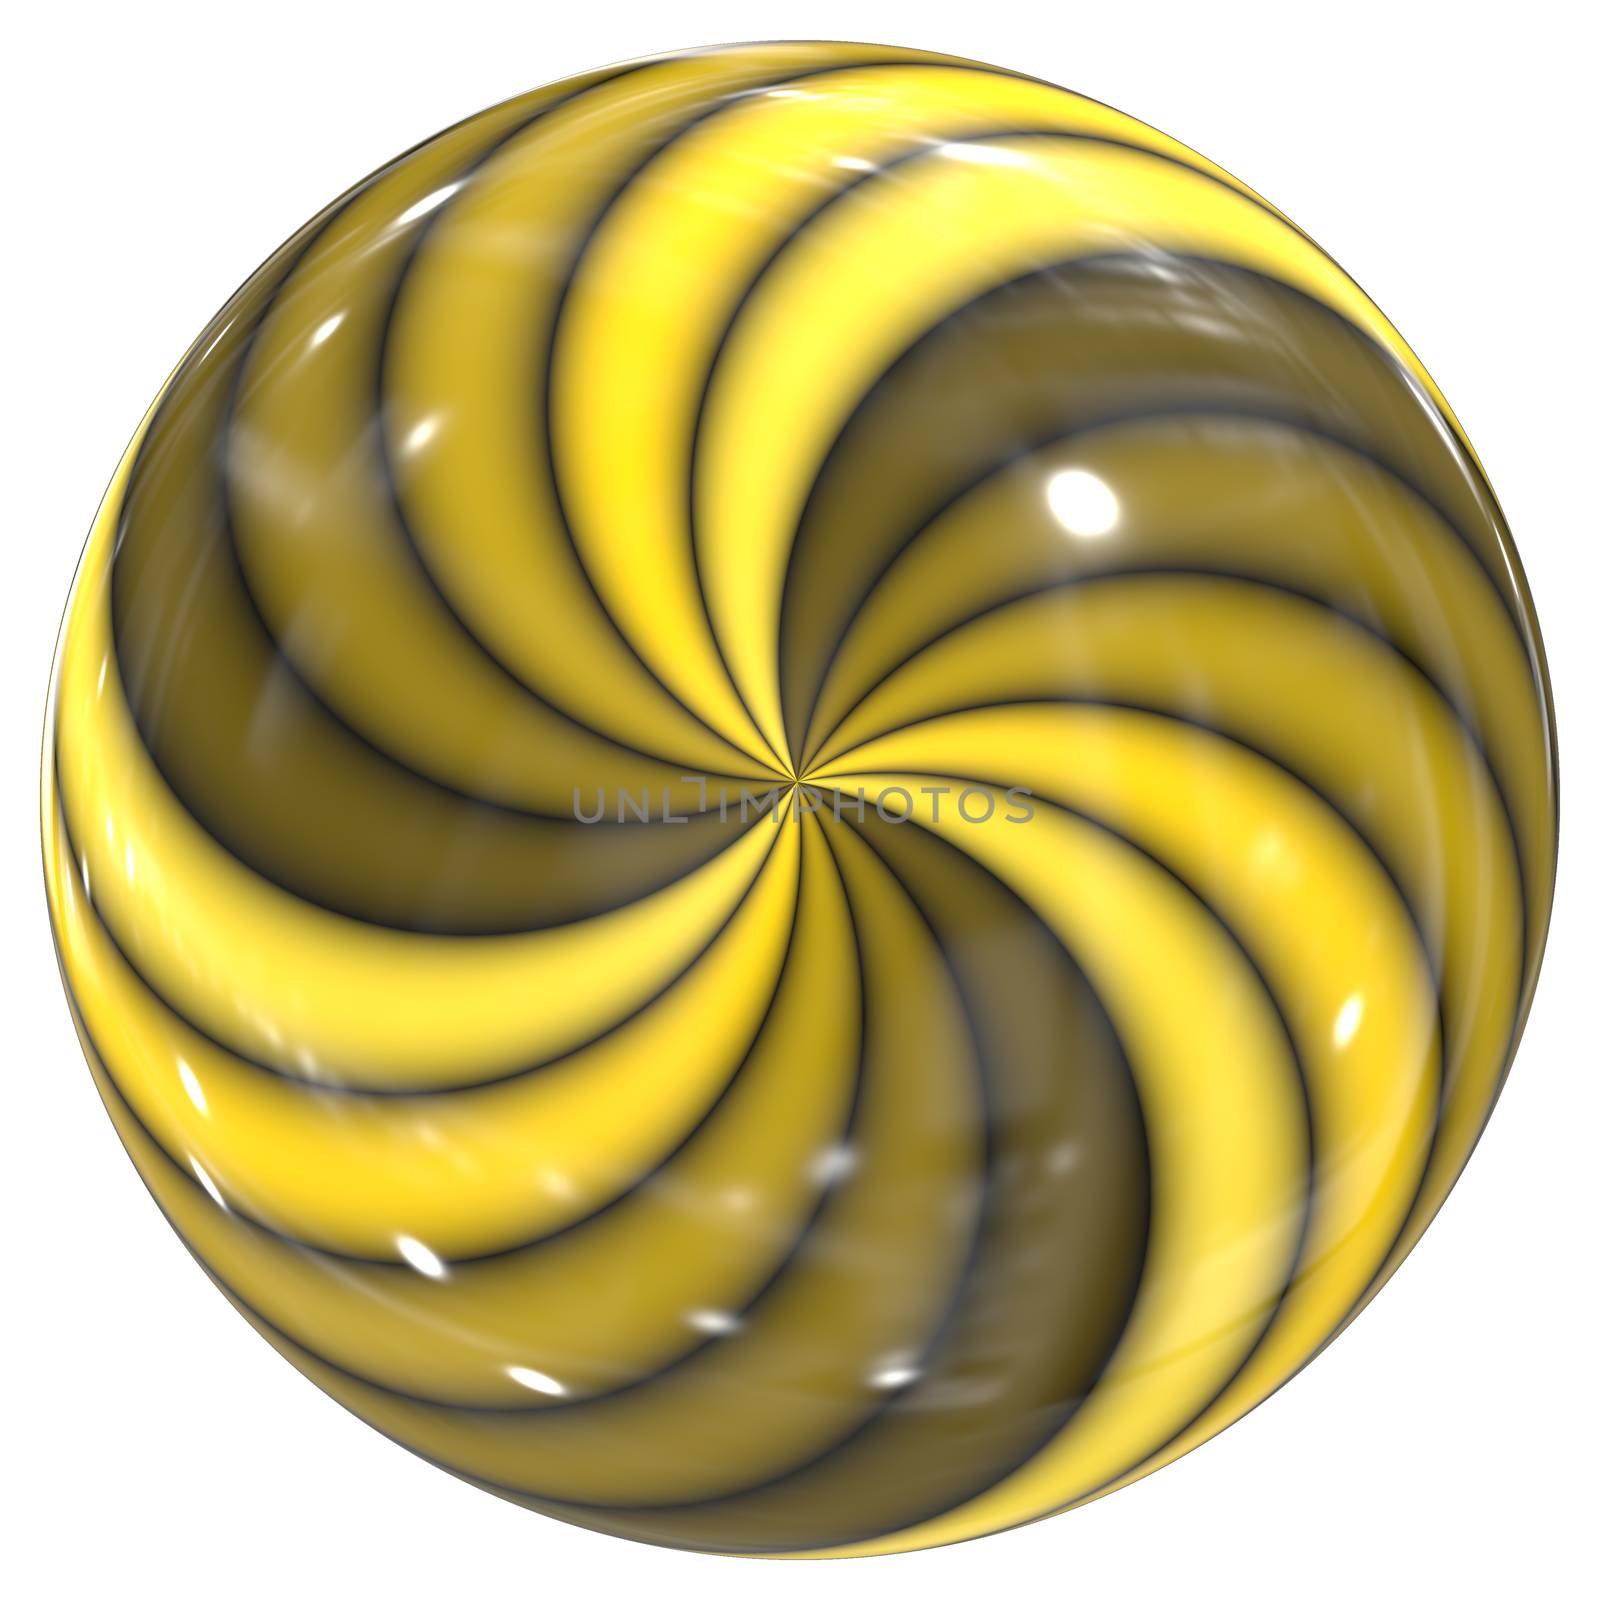 An illustration of a yellow swirl glass sphere